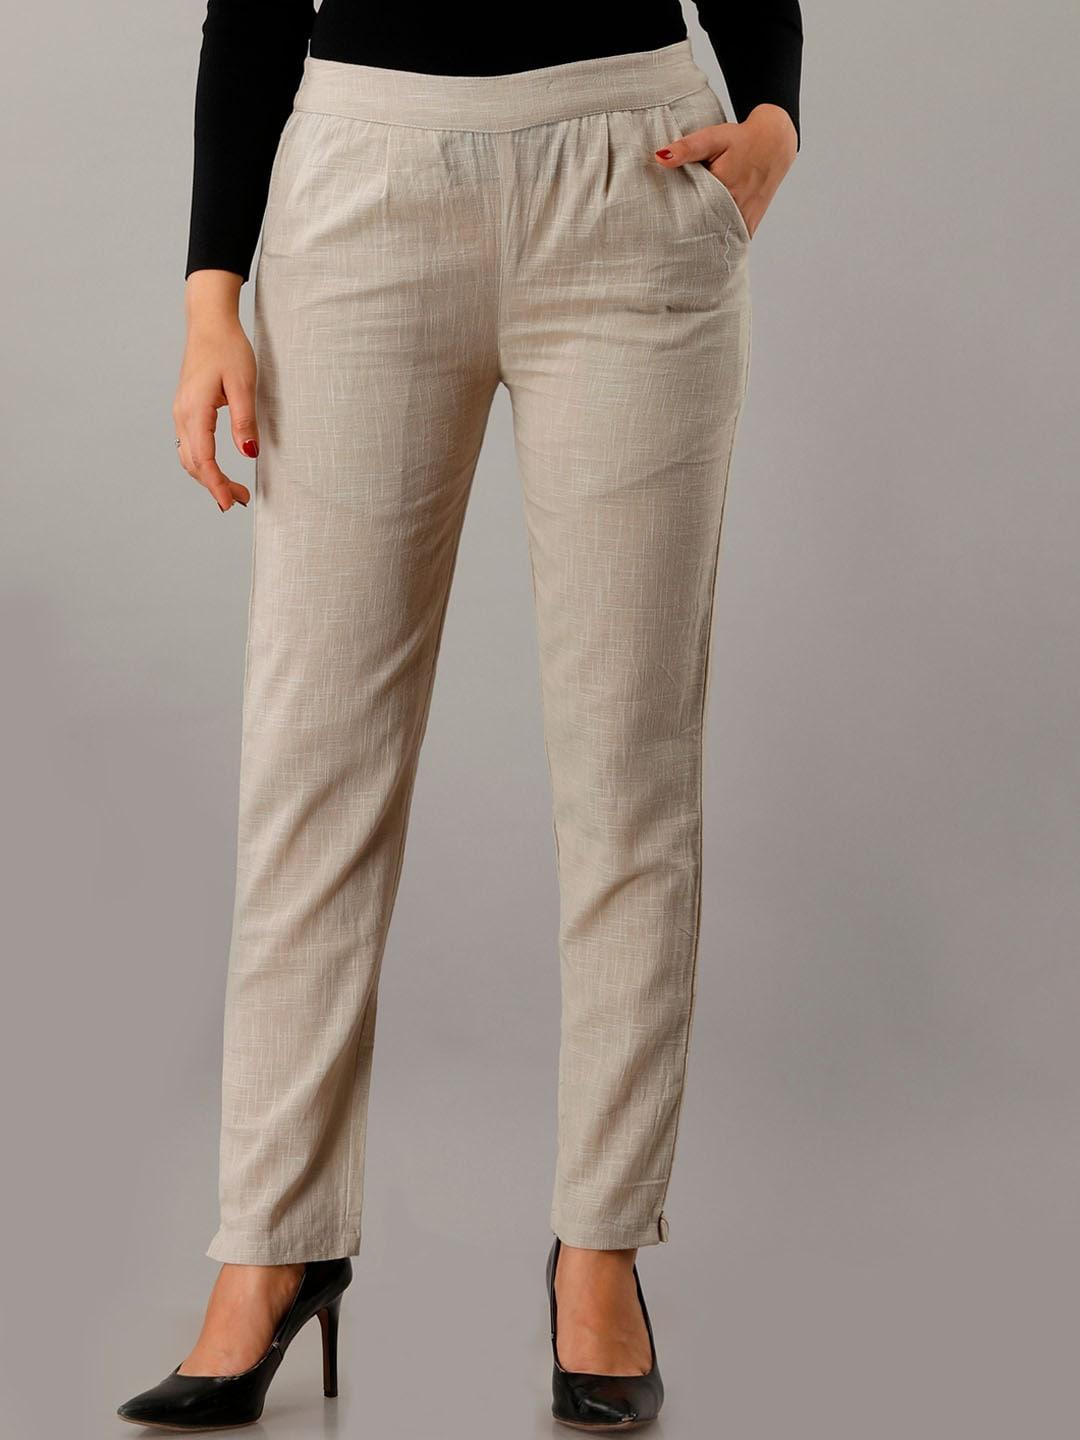 here&now women relaxed mid-rise cotton plain formal trousers trouser